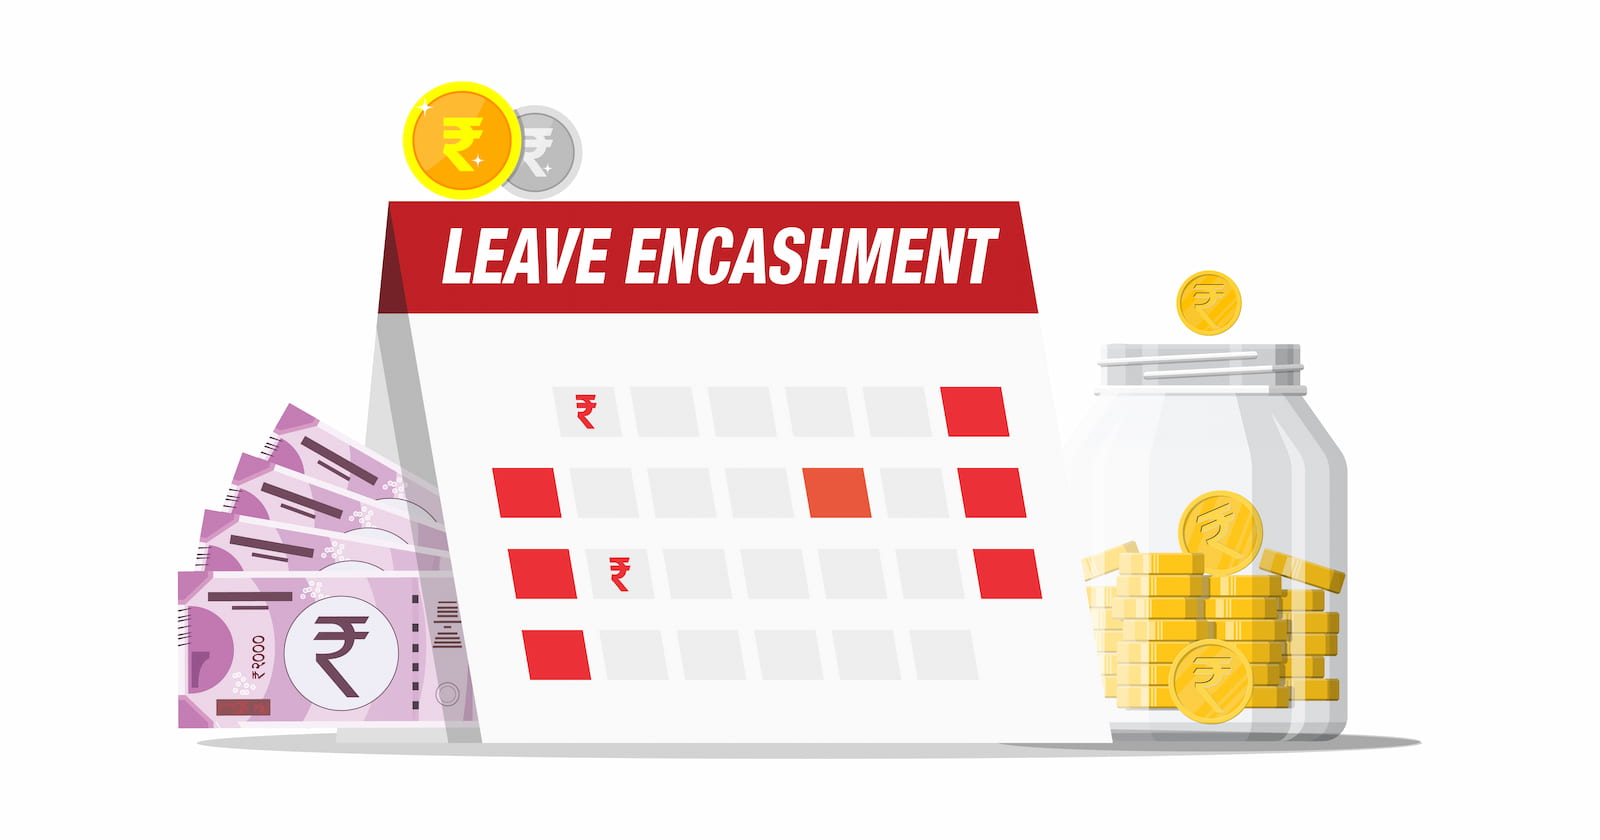 Tax Talk: Resigned? Your encashed leaves are exempt from tax